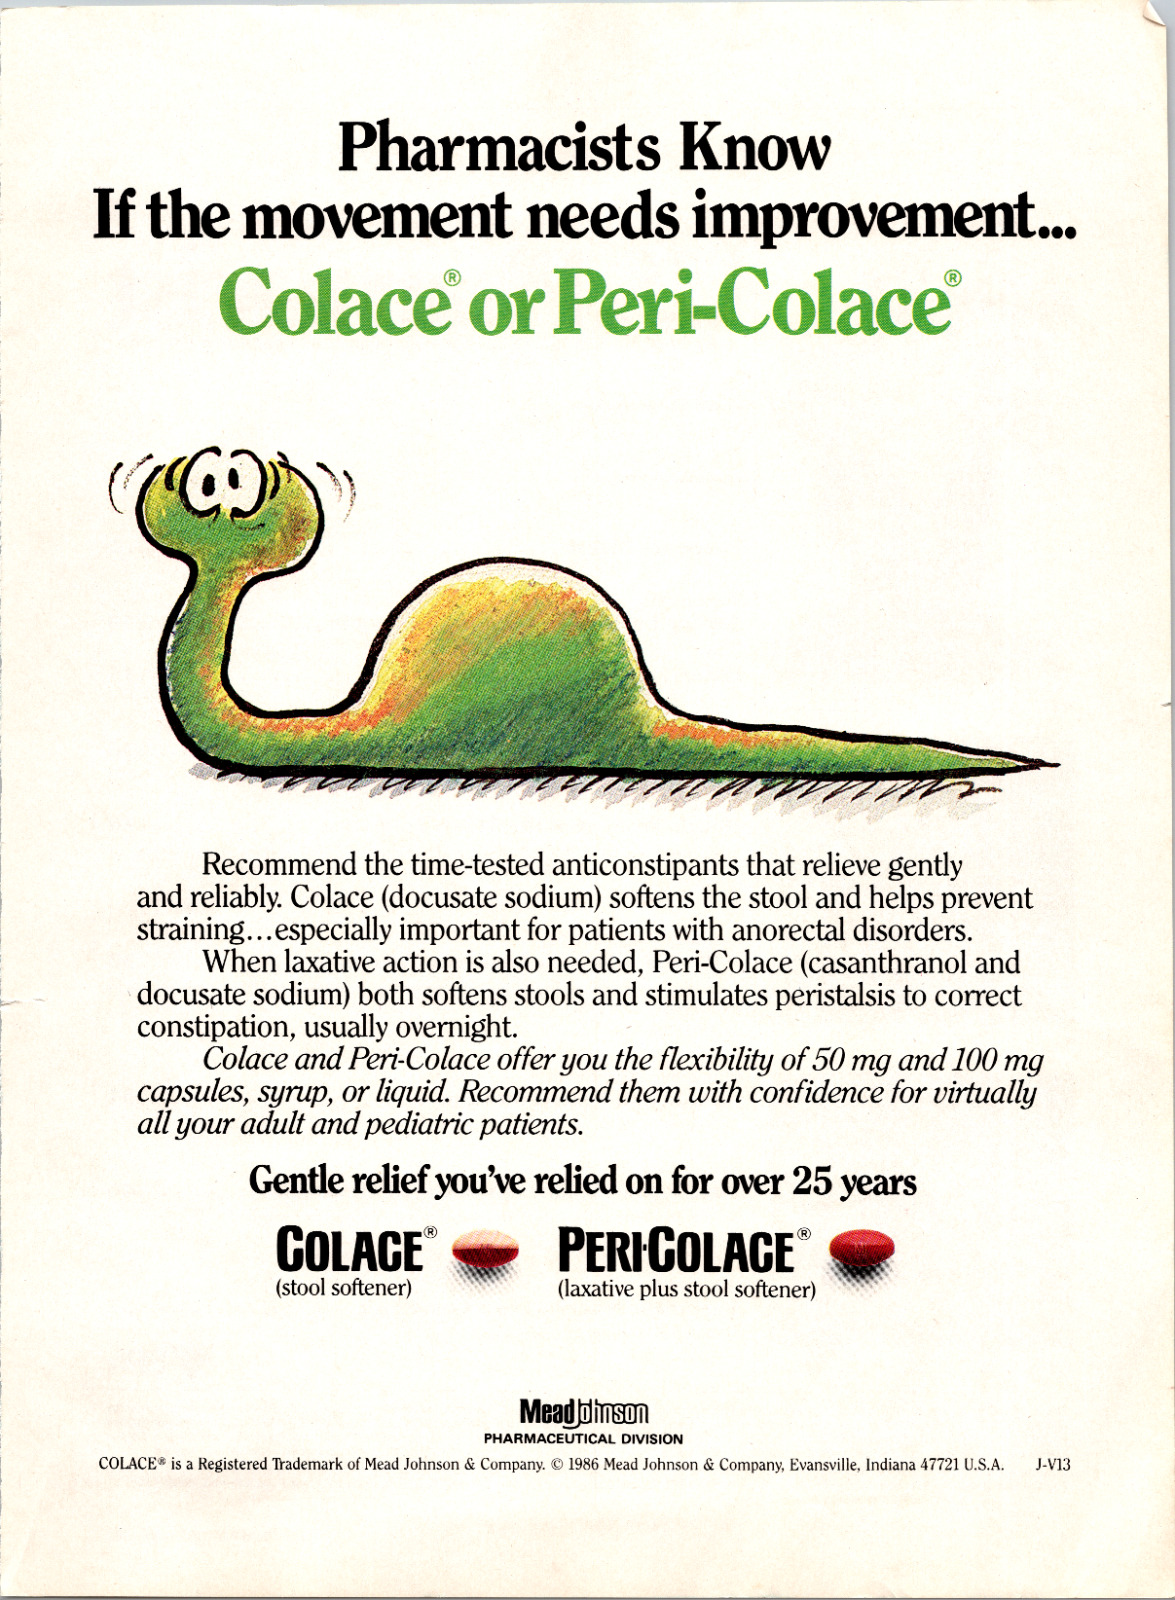 1986 Pharmacists Colace Peri-Colace Stool Softener Vintage Print AD